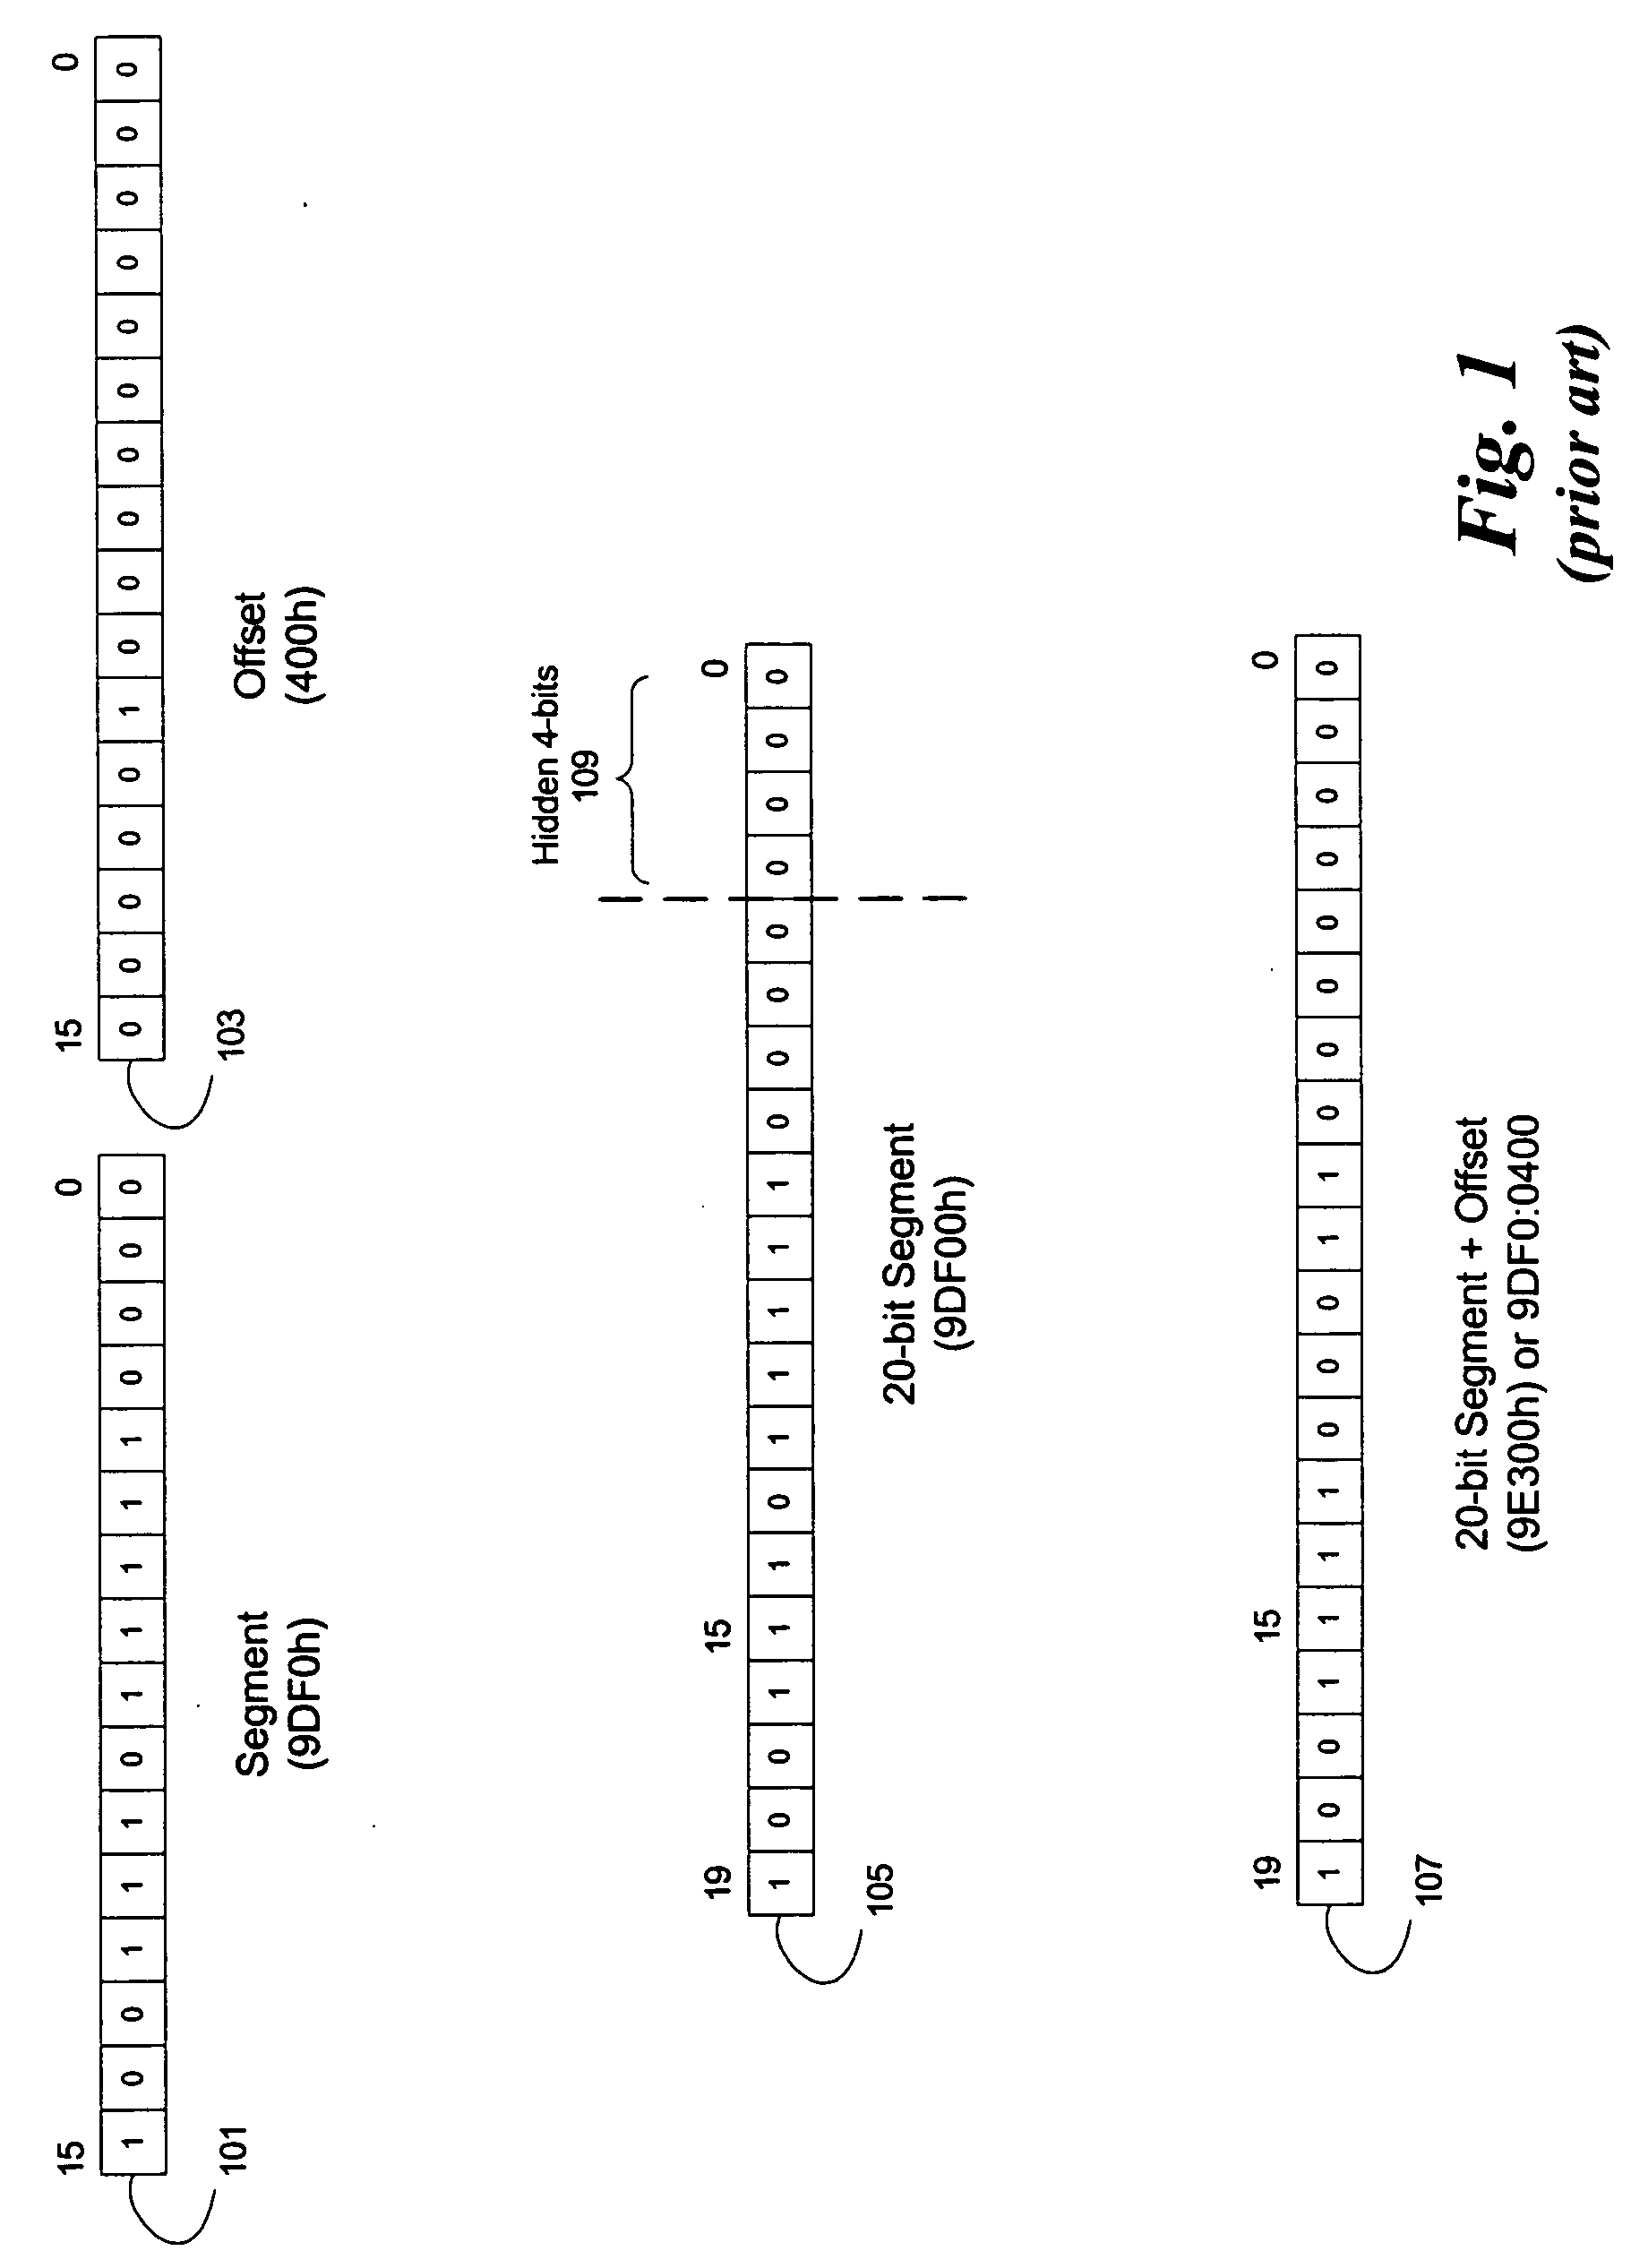 System and method for simulating real-mode memory access with access to extended memory